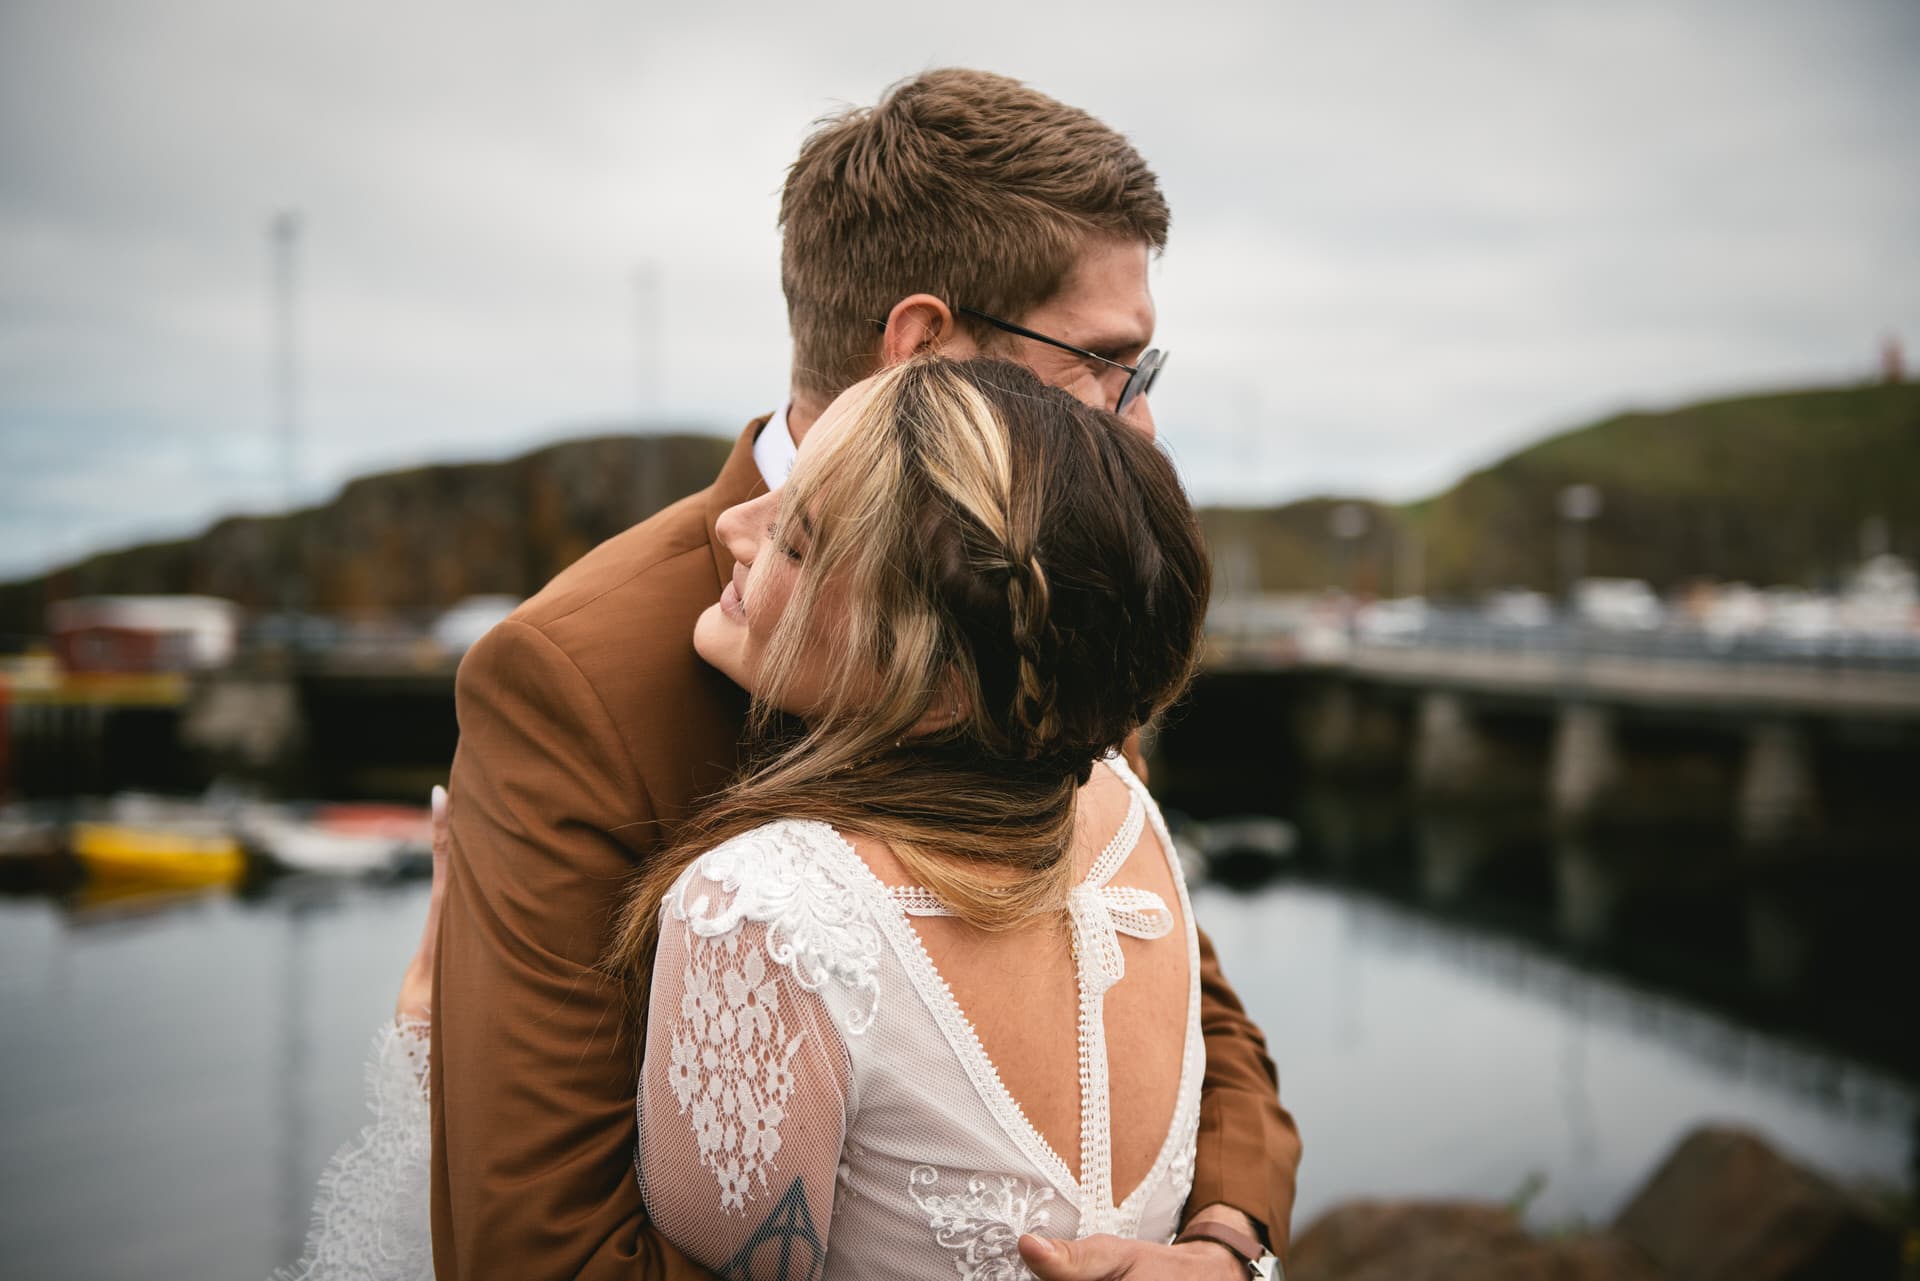 Bride and groom embrace amid the charm of a quaint Icelandic village.